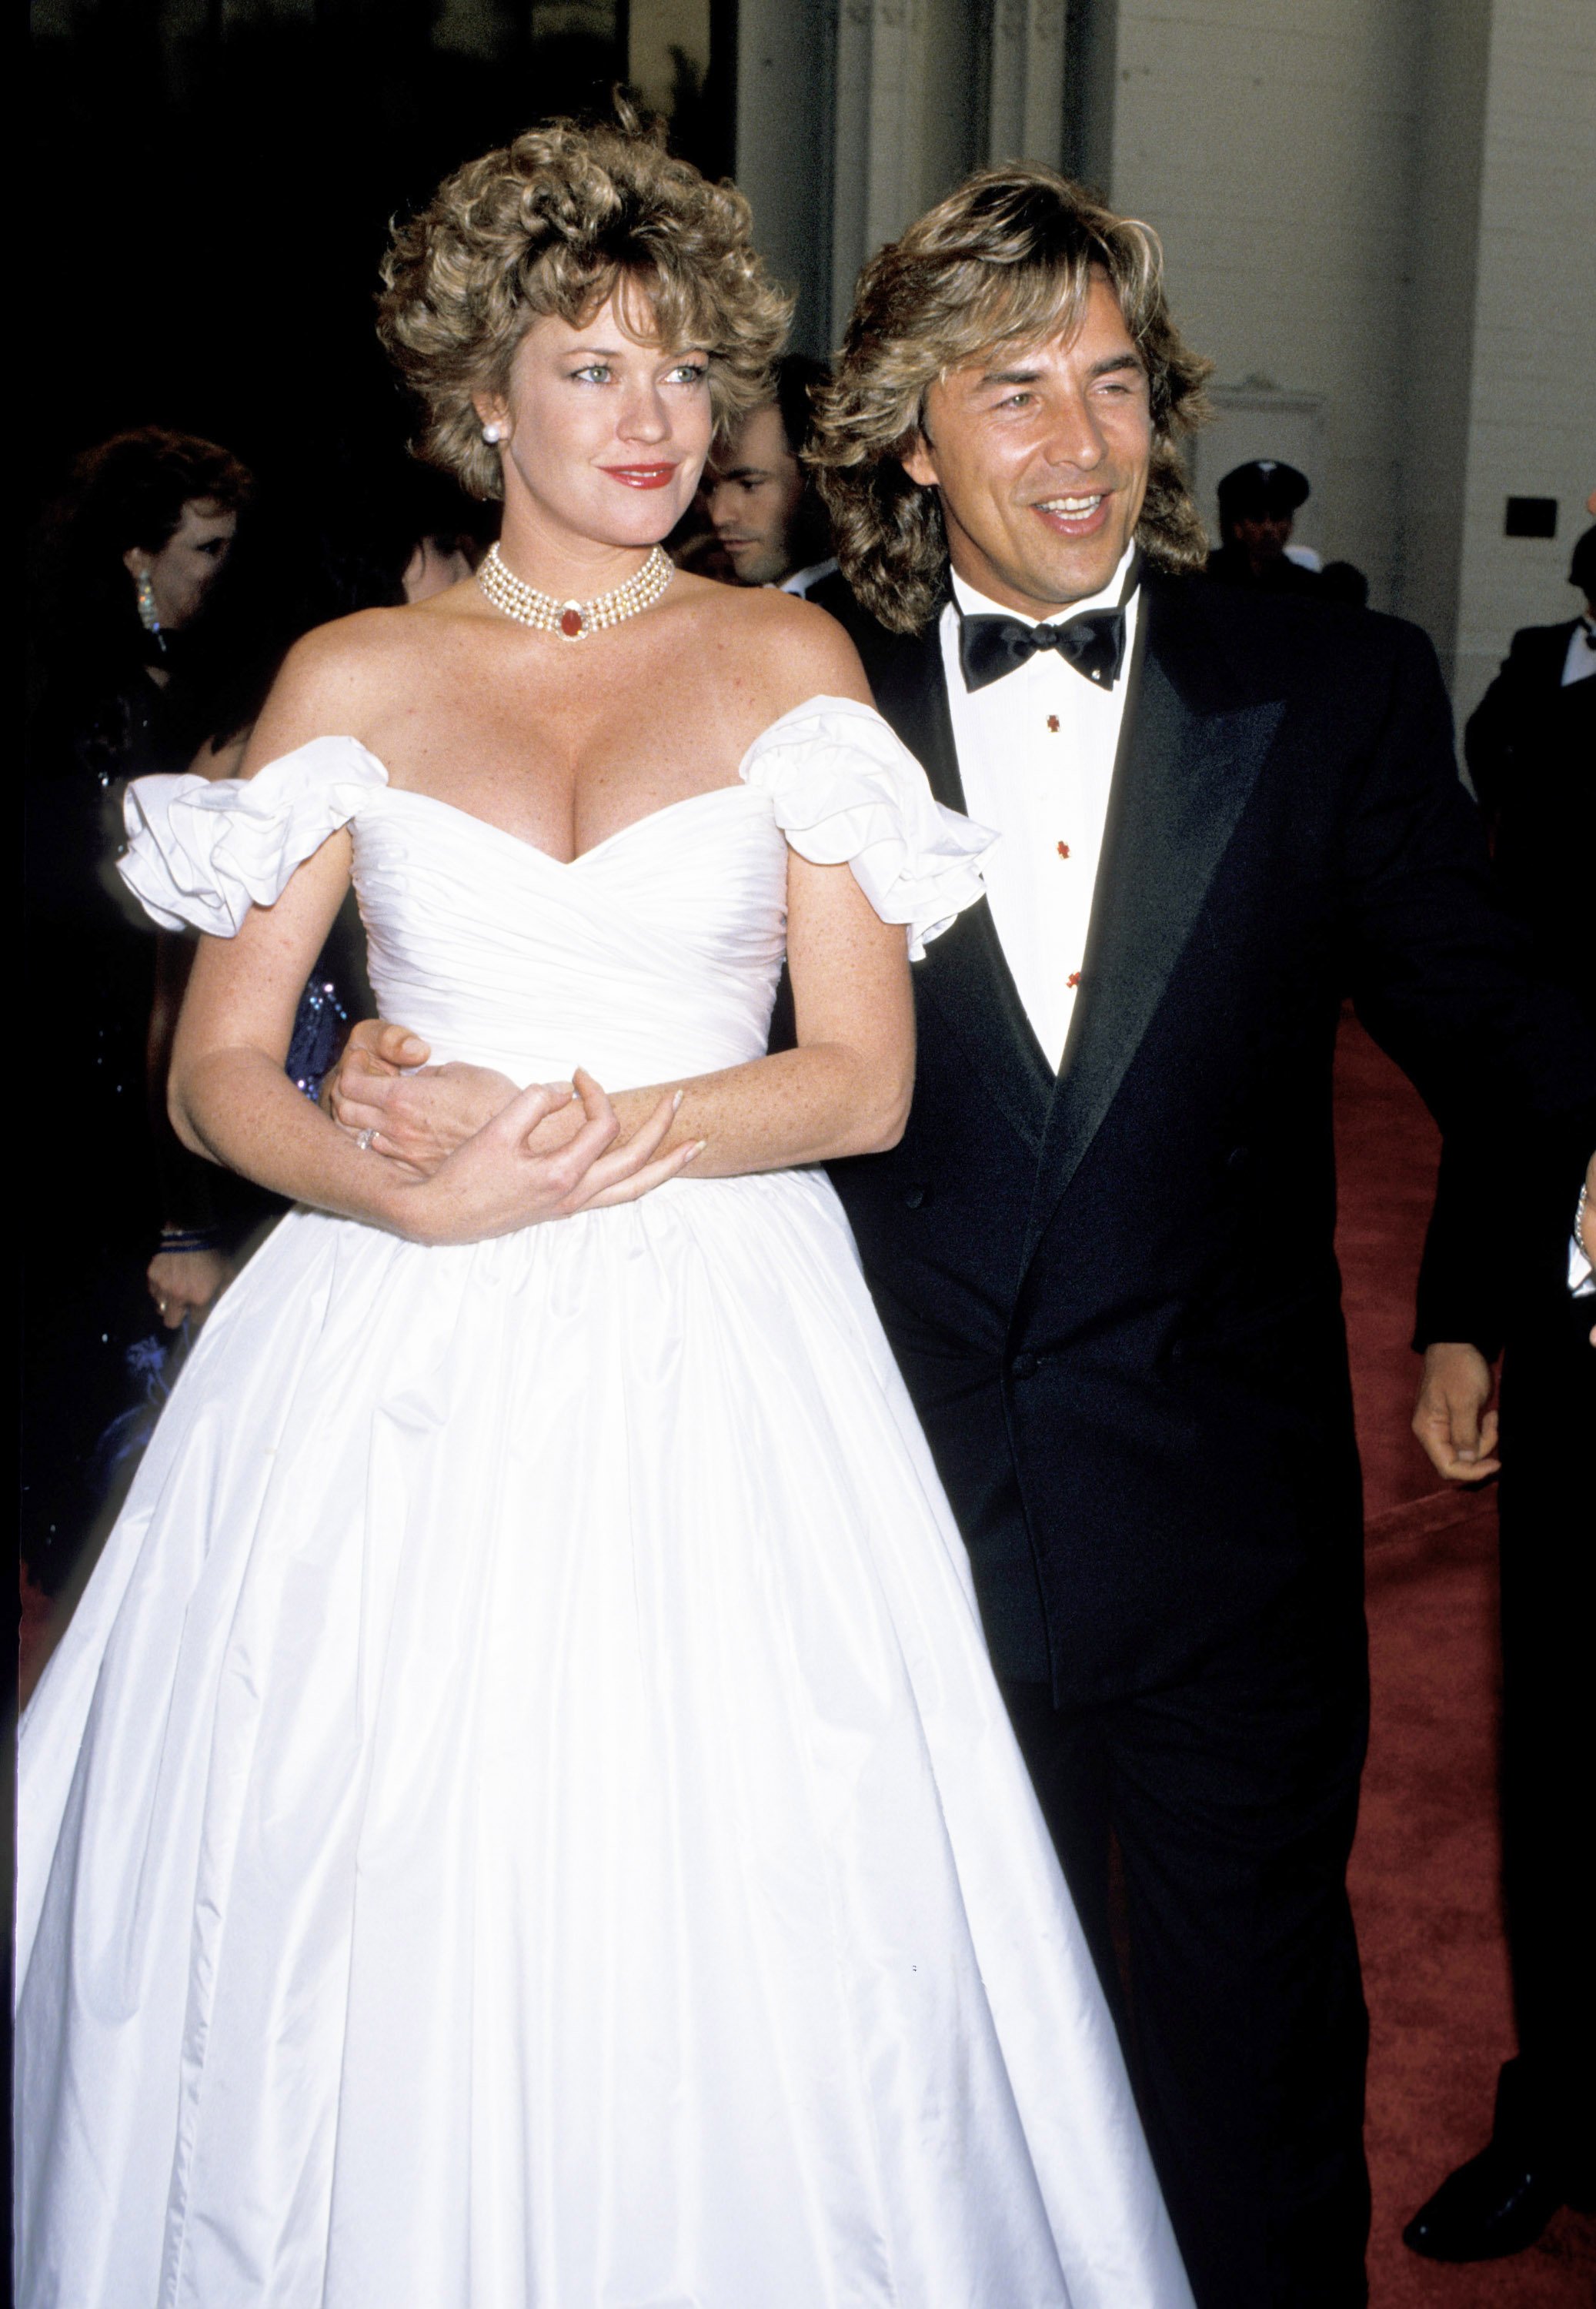 Melanie Griffith and Don Johnson were spotted in Los Angeles during 61st Annual Academy Awards - Arrivals at Shrine Auditorium. | Source: Getty Images